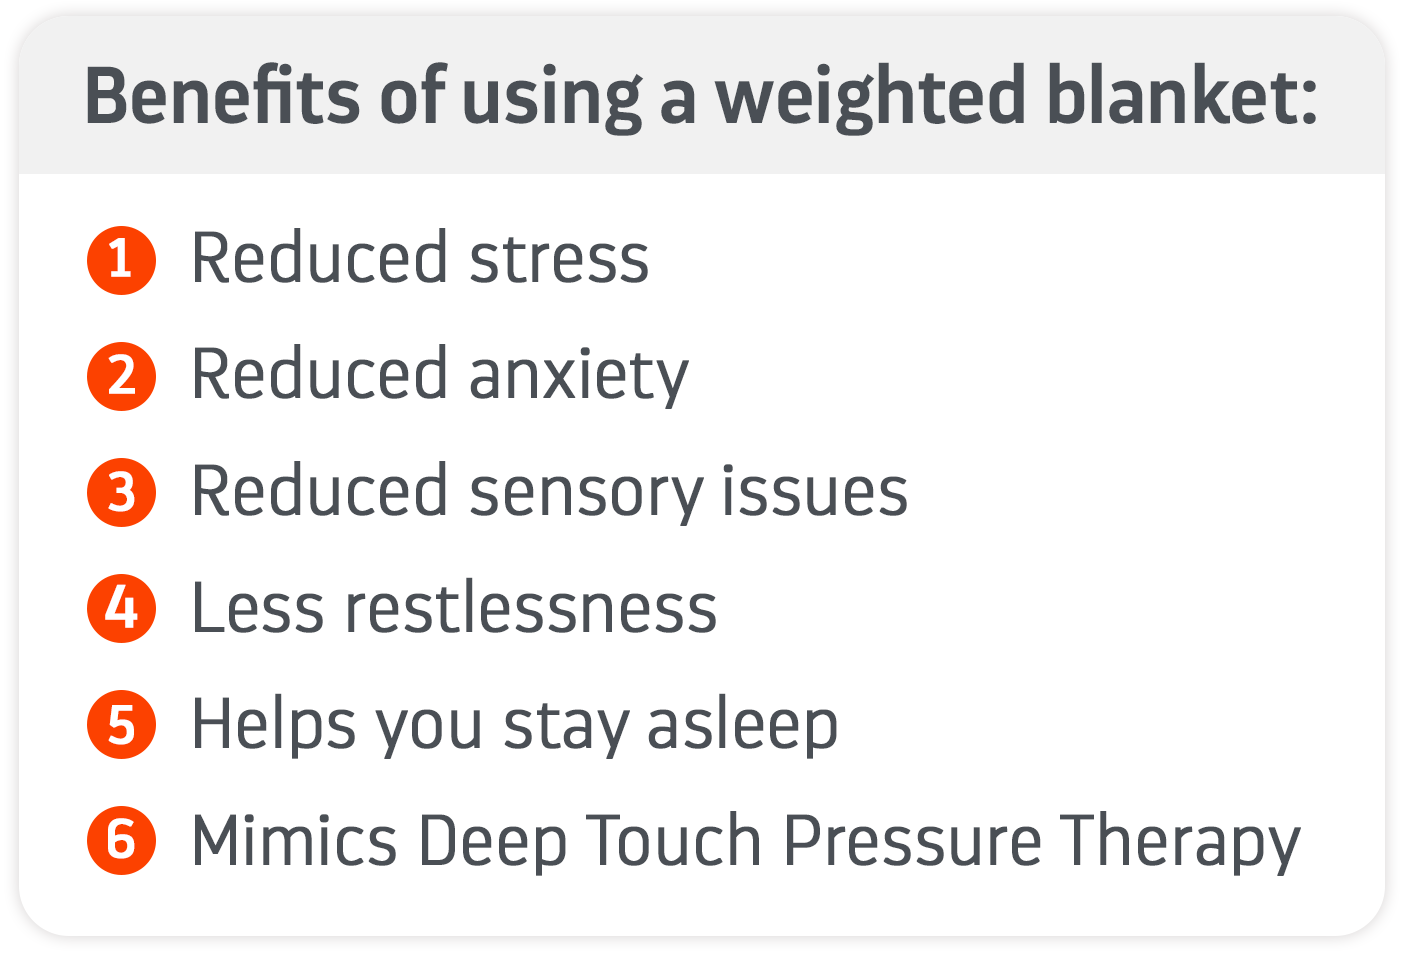 Benefits of using a weighted blanket